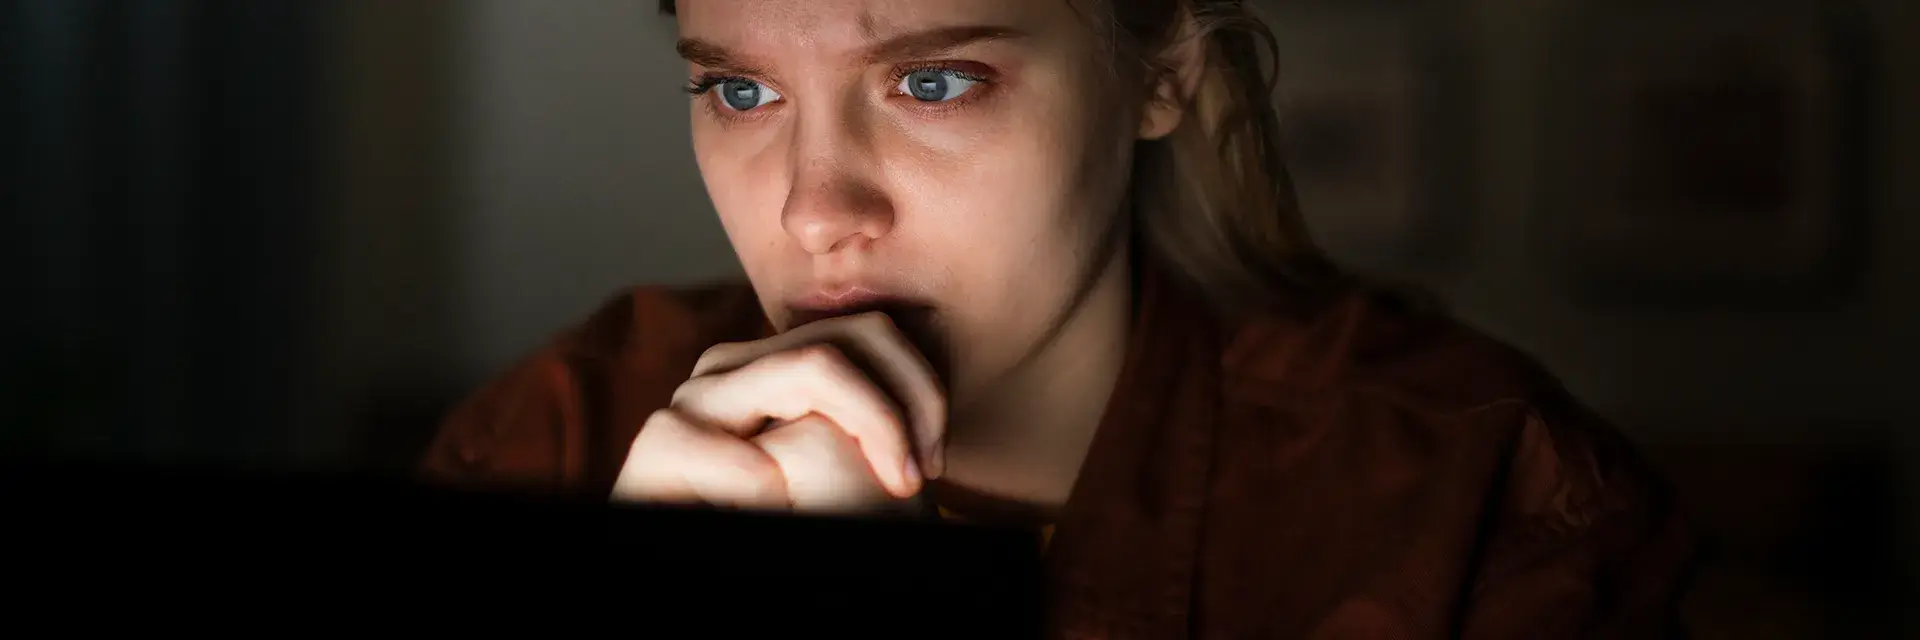 Concerned woman using a laptop in a dark room